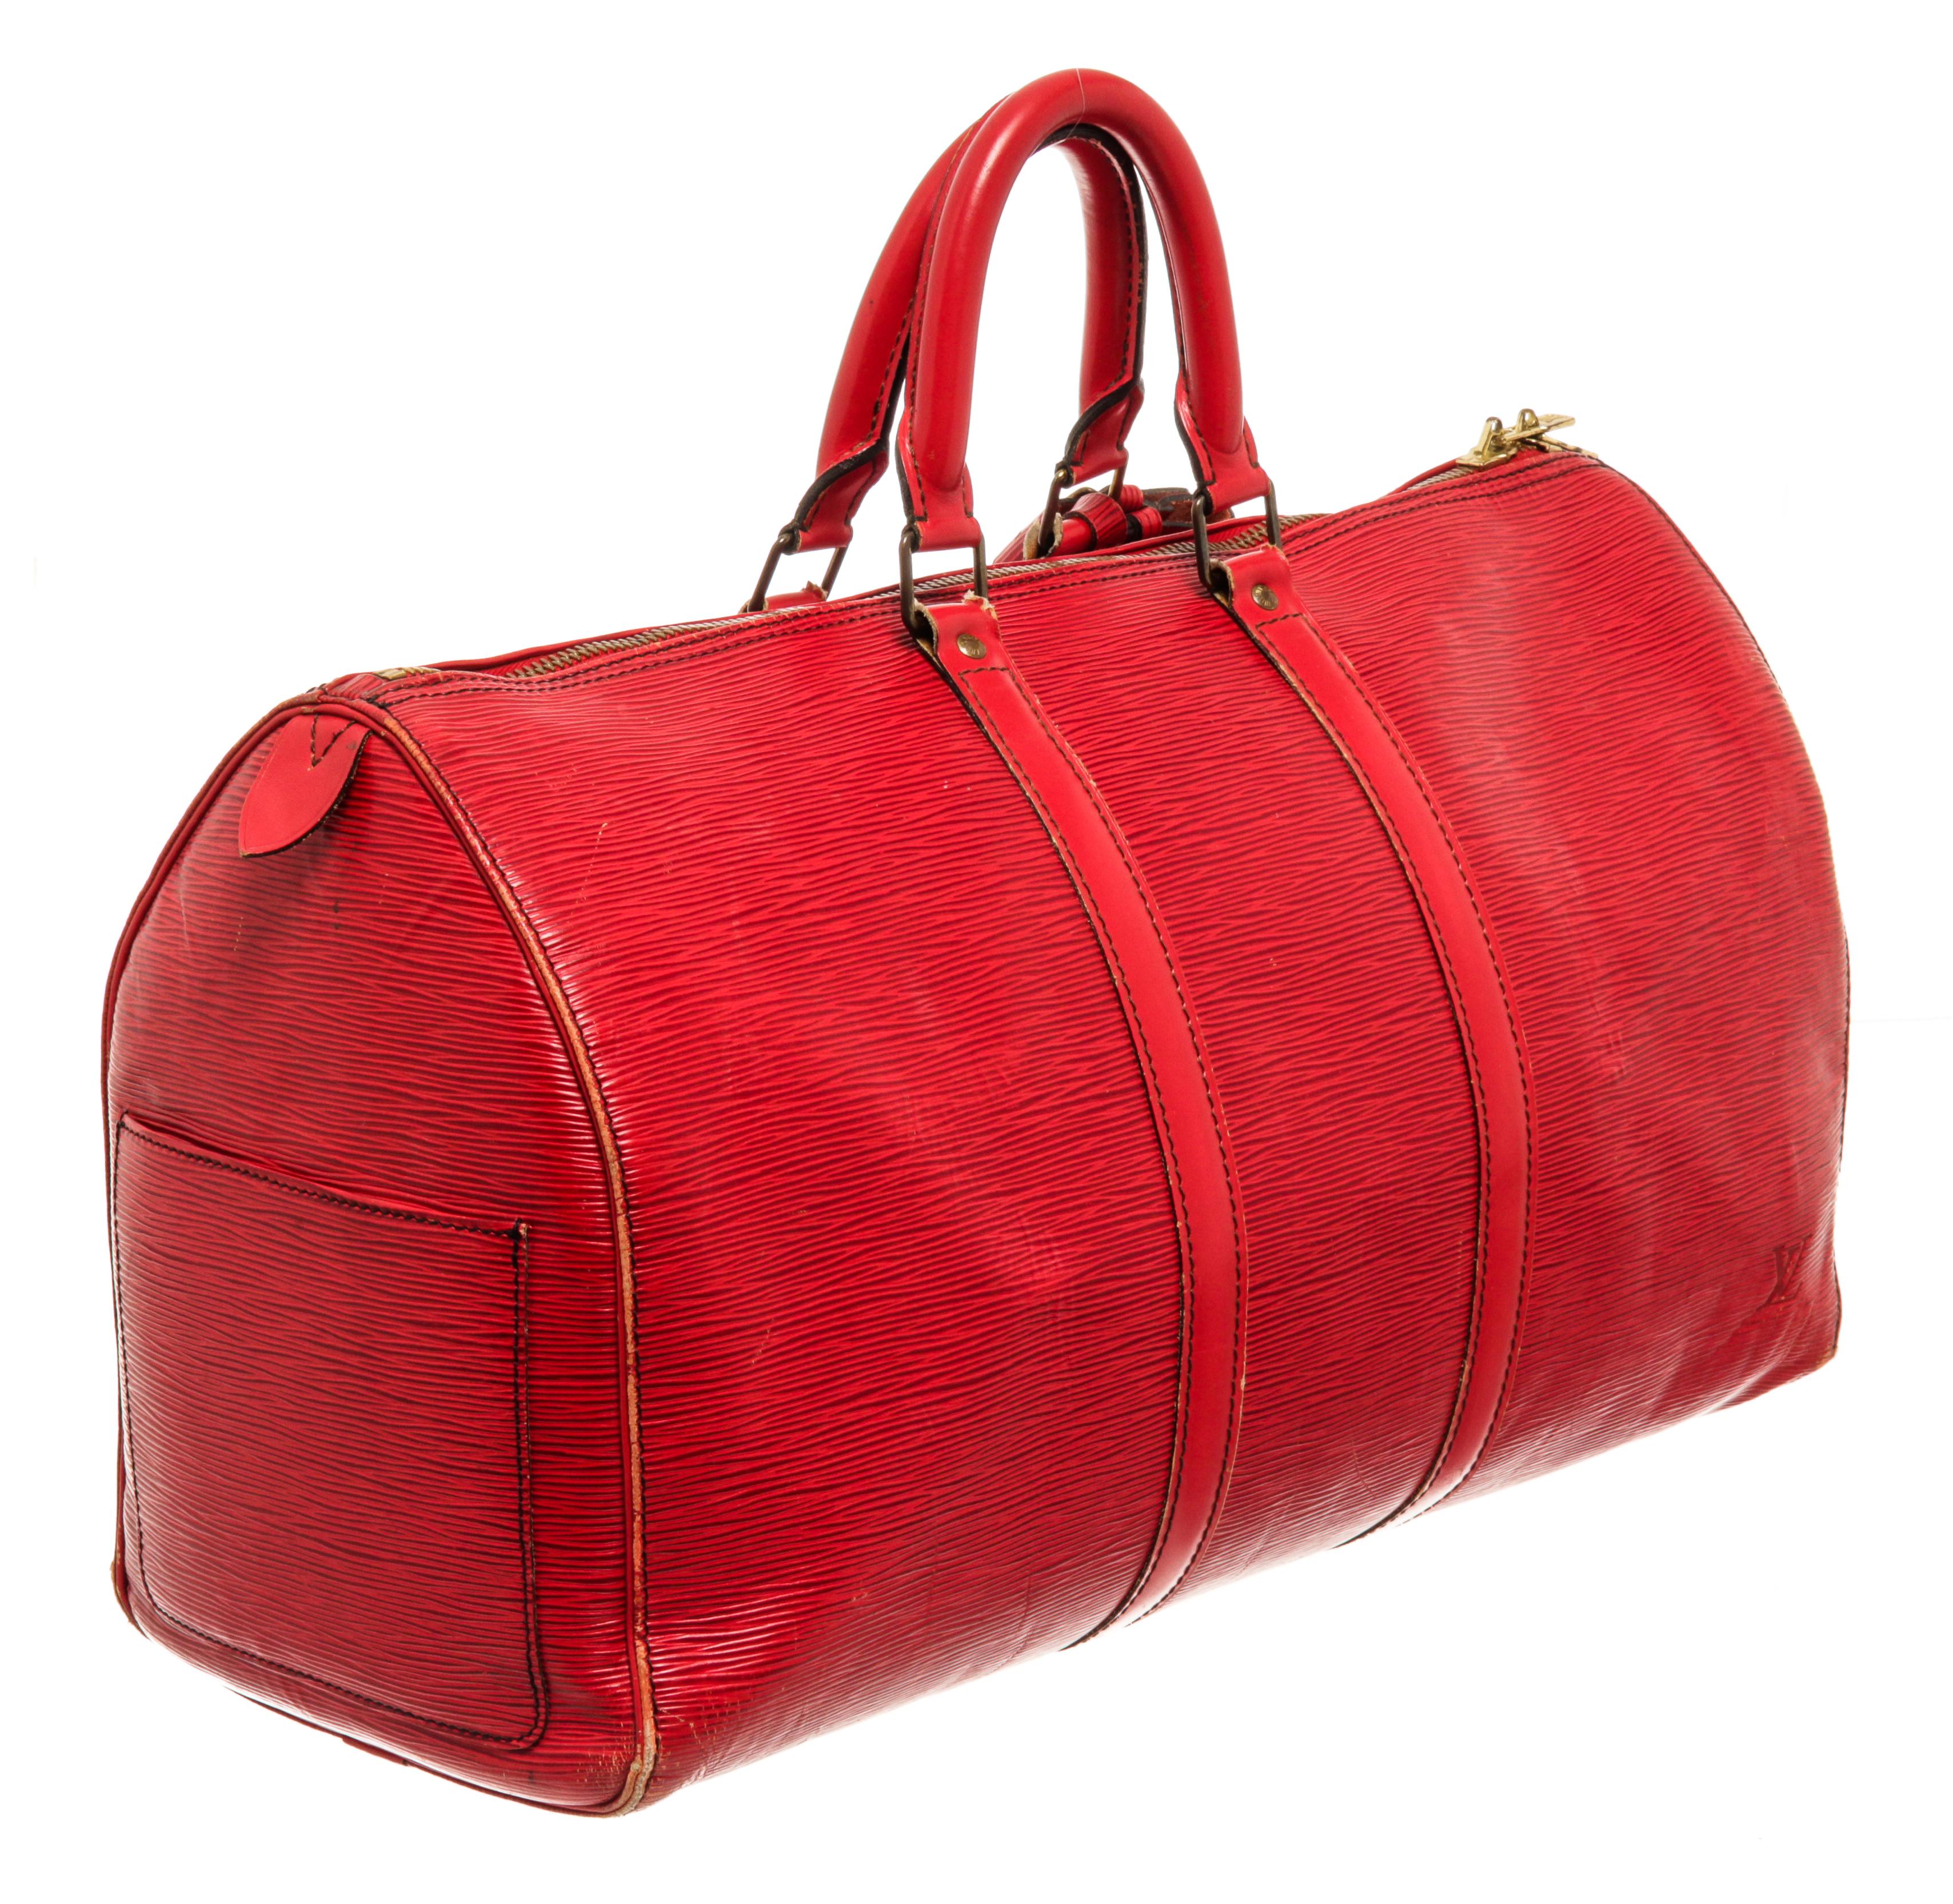 Louis Vuitton Red Epi Leather Keepall 45cm Duffel Luggage Bag In Good Condition For Sale In Irvine, CA